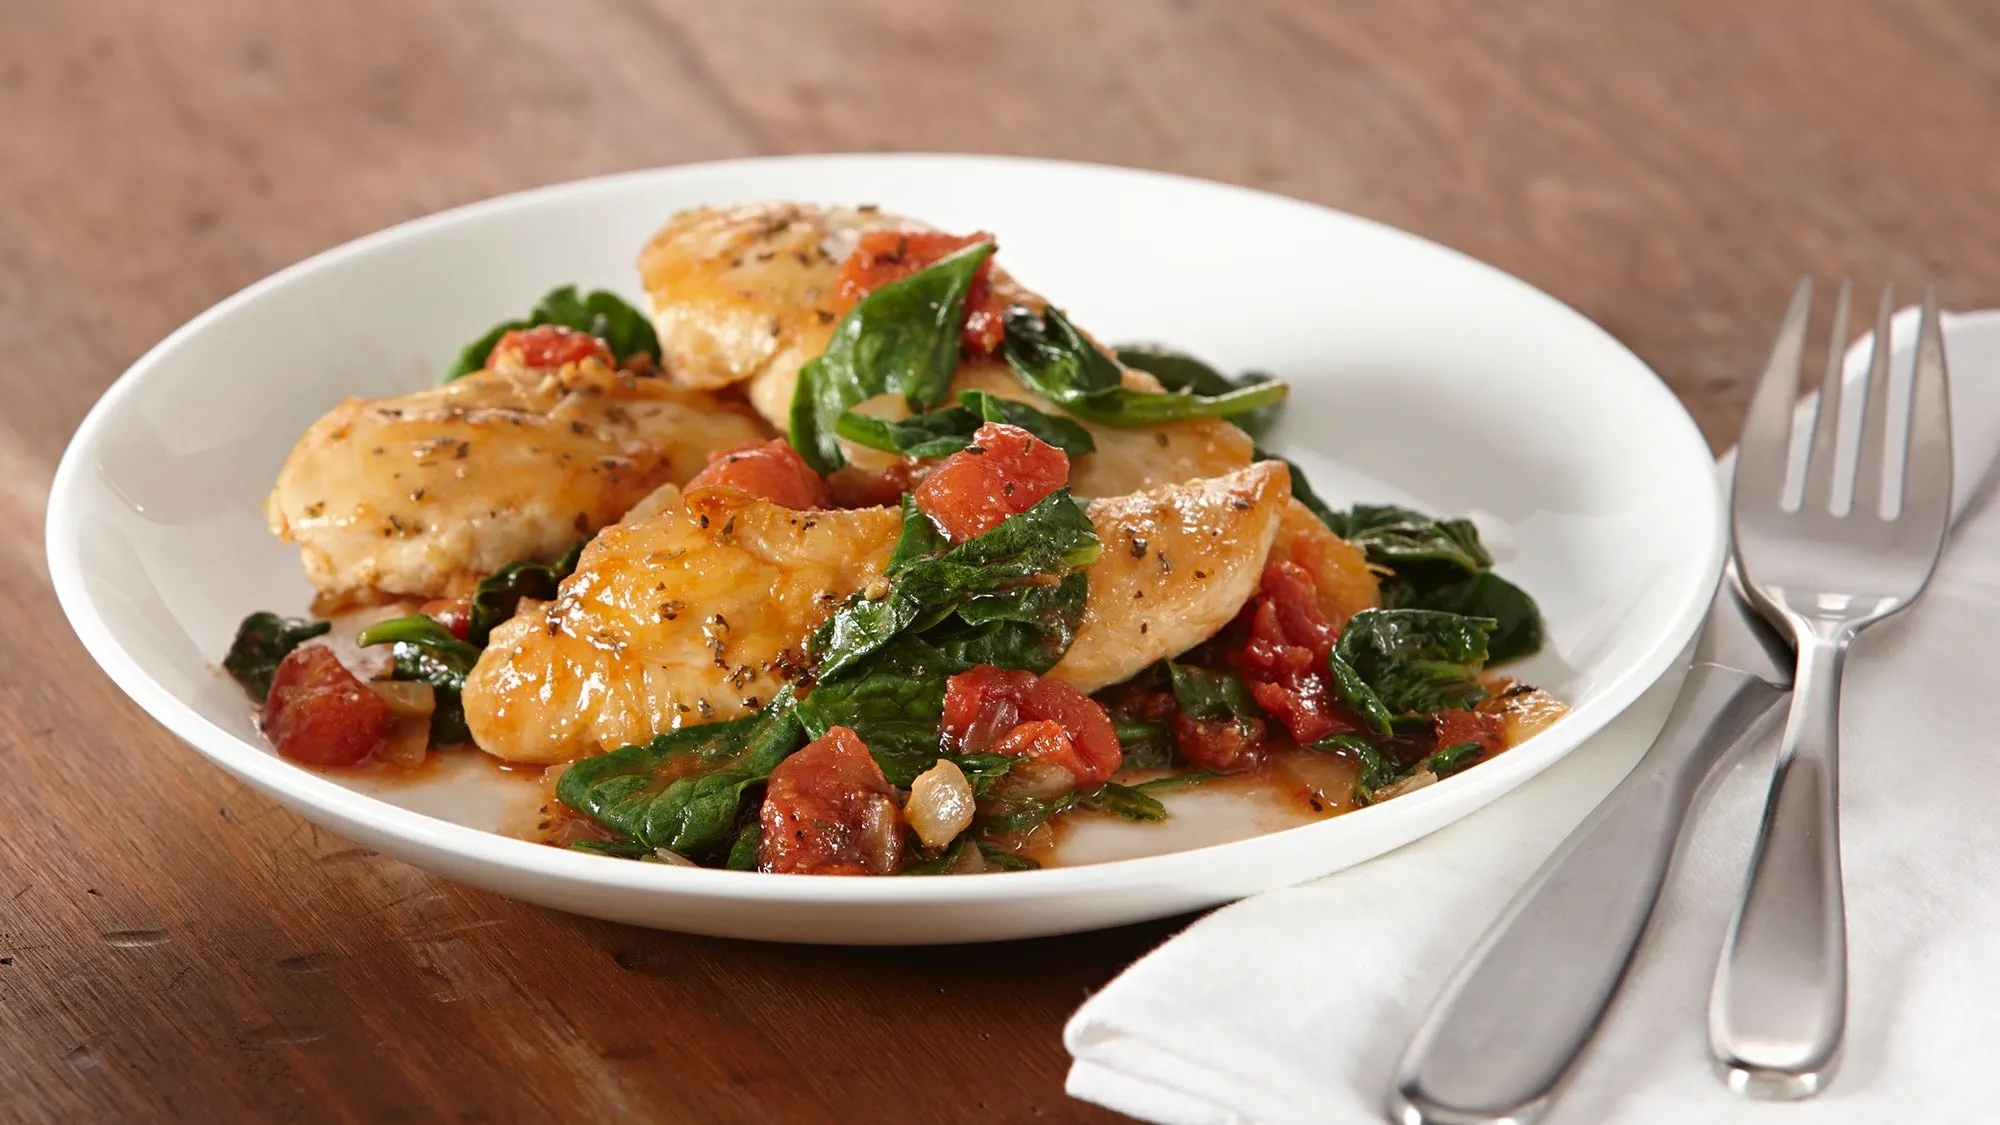 CHICKEN TENDERS WITH SPINACH AND TOMATOES